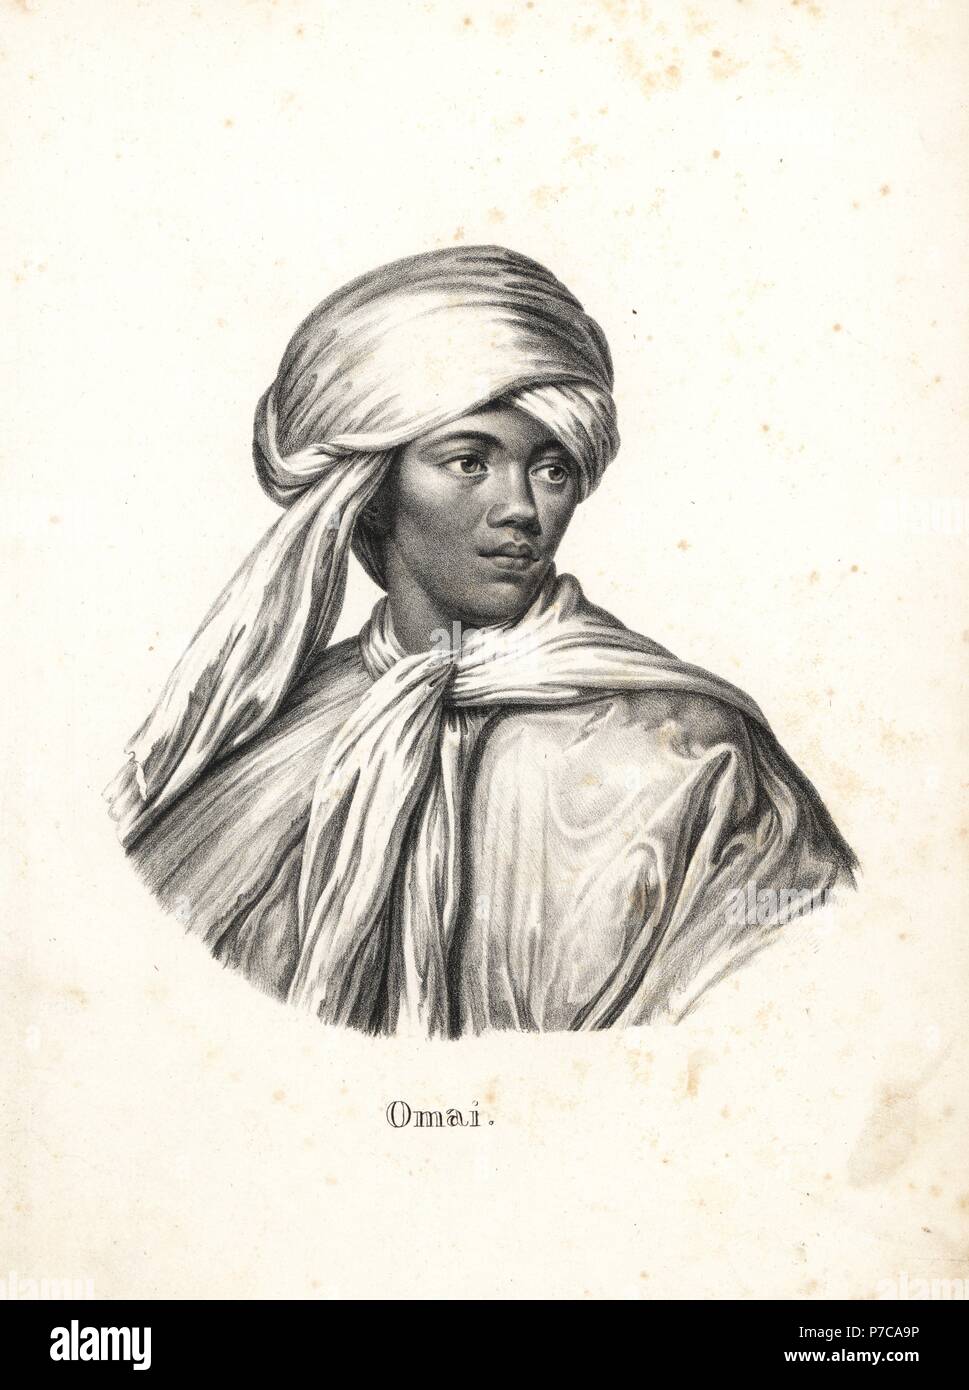 Mai or Omai, young Ra'iatean man, Society Islands, in turban and cape. The second Pacific Islander to visit Europe after Ahu-toru. Lithograph by Karl Joseph Brodtmann from Heinrich Rudolf Schinz's Illustrated Natural History of Men and Animals, 1836. Stock Photo